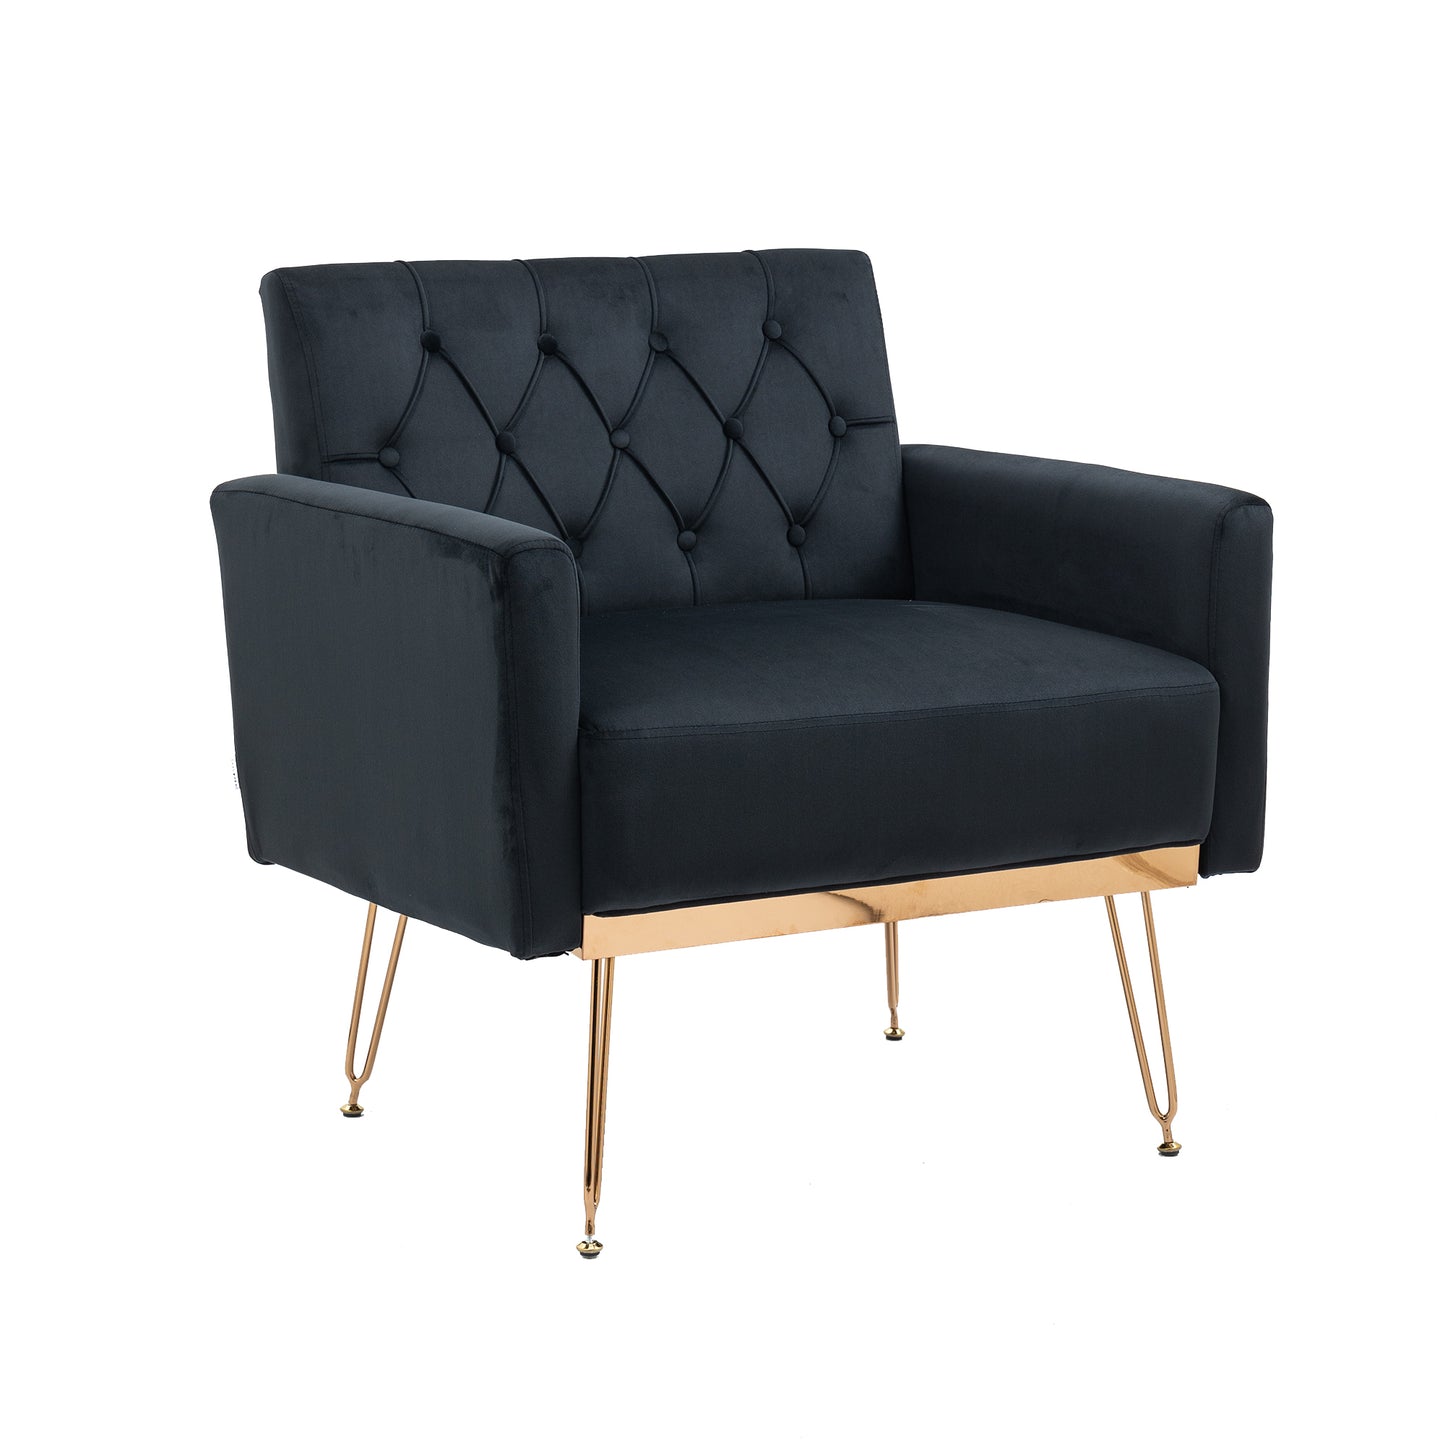 COOLMORE Accent  Chair  ,leisure single sofa  with Rose Golden  feet